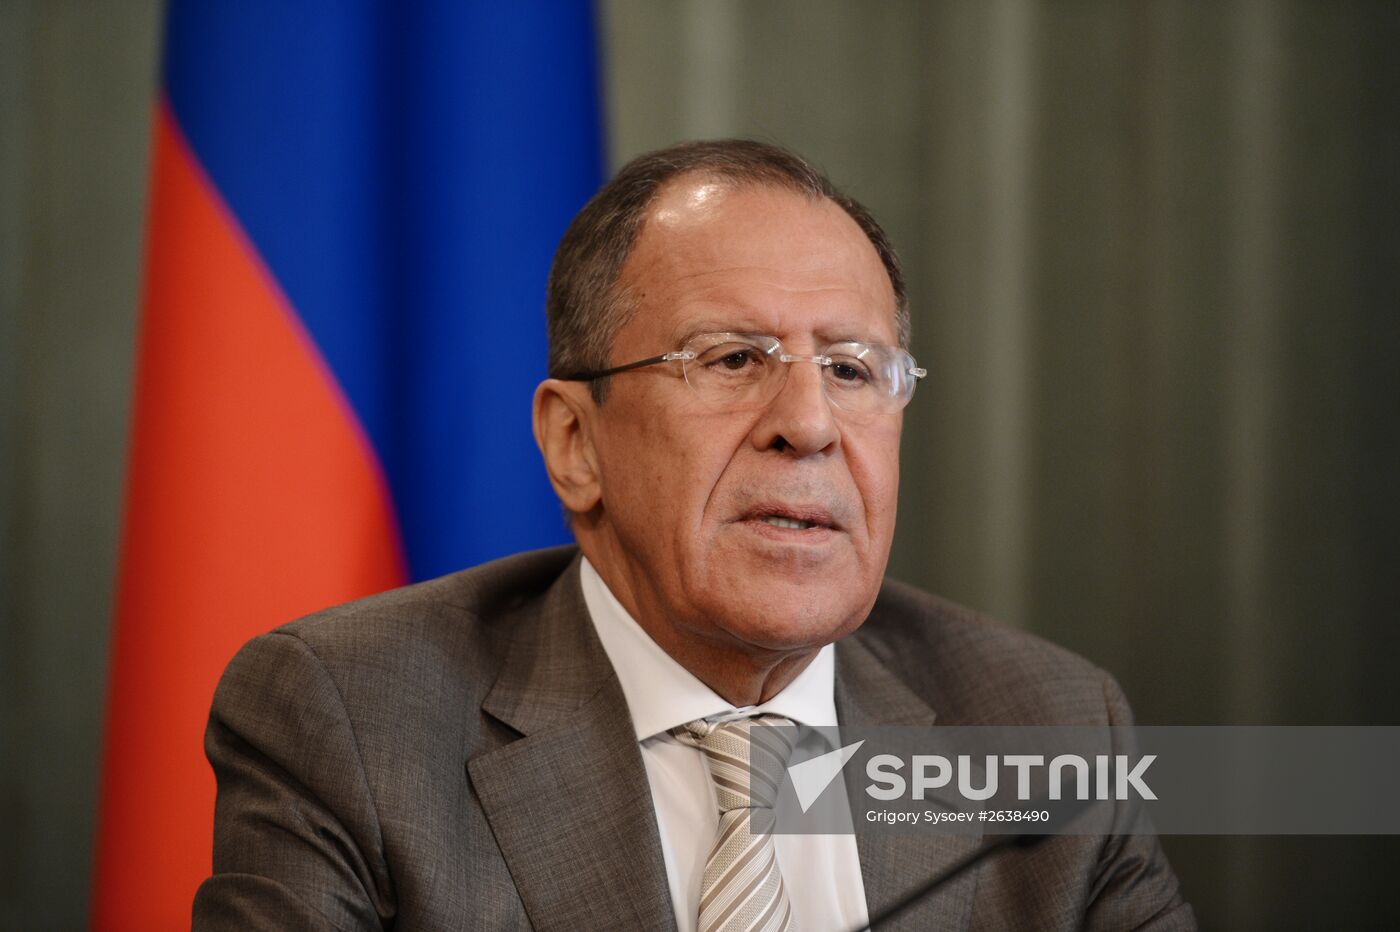 Talks between Russian and Belarusian foreign ministers Sergey Lavrov and Vladimir Makei